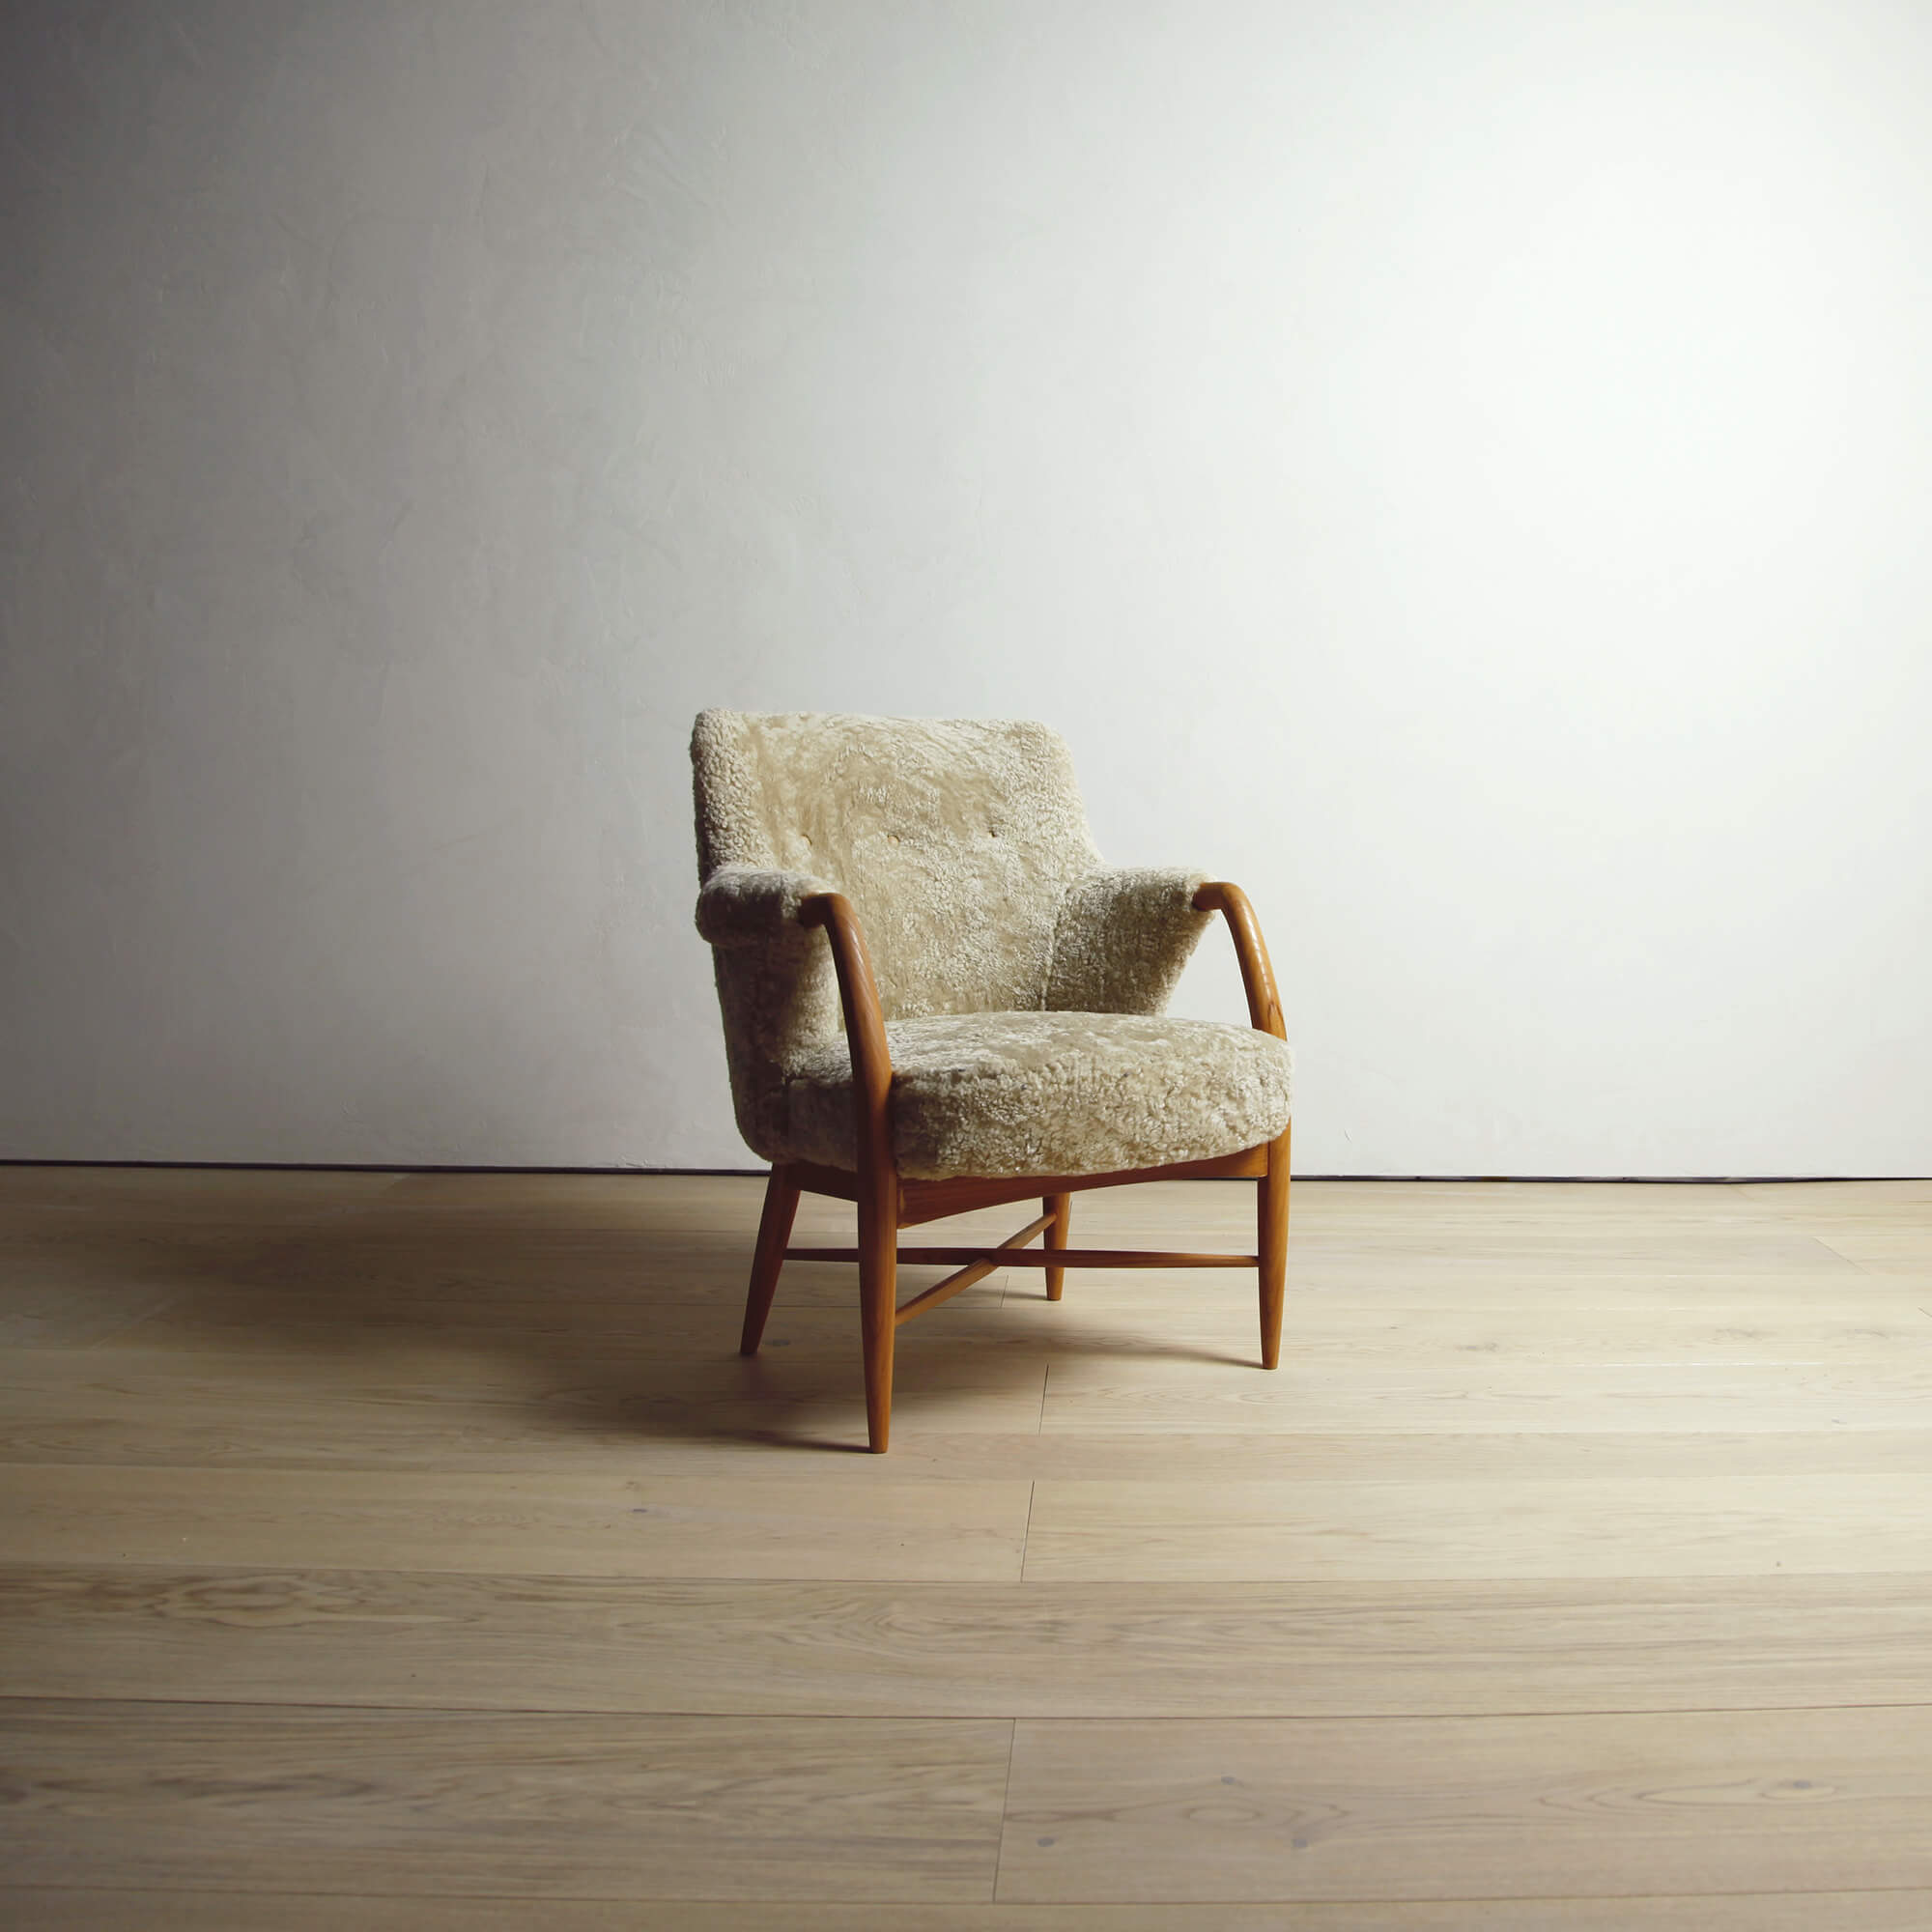 1950s Shearling-covered Armchair by Carin Bryggman